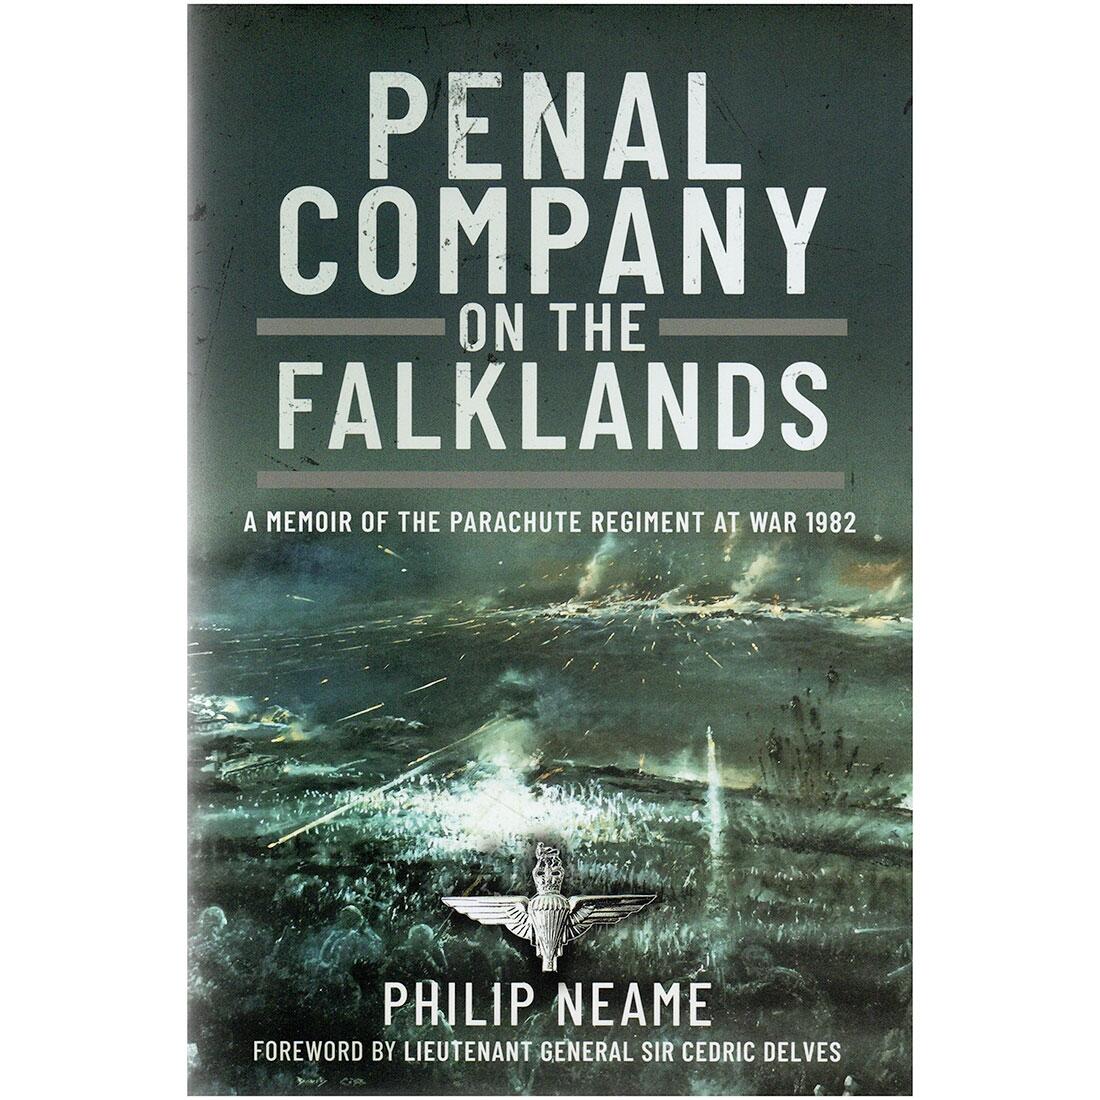 Penal Company on The Falklands by Philip Neame (Book)